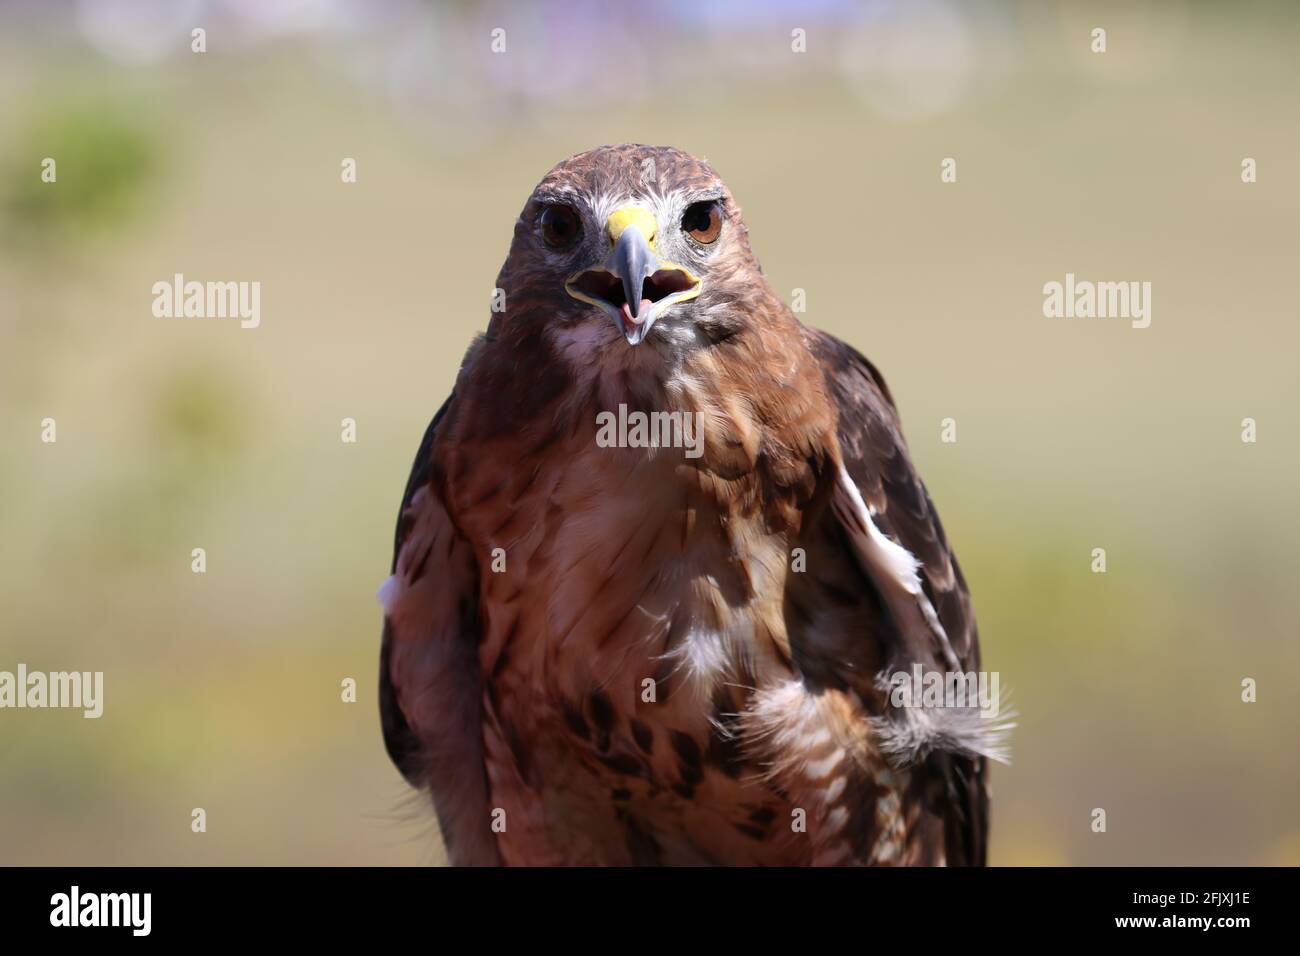 Red-tailed hawk looking at camera with serious expression Stock Photo